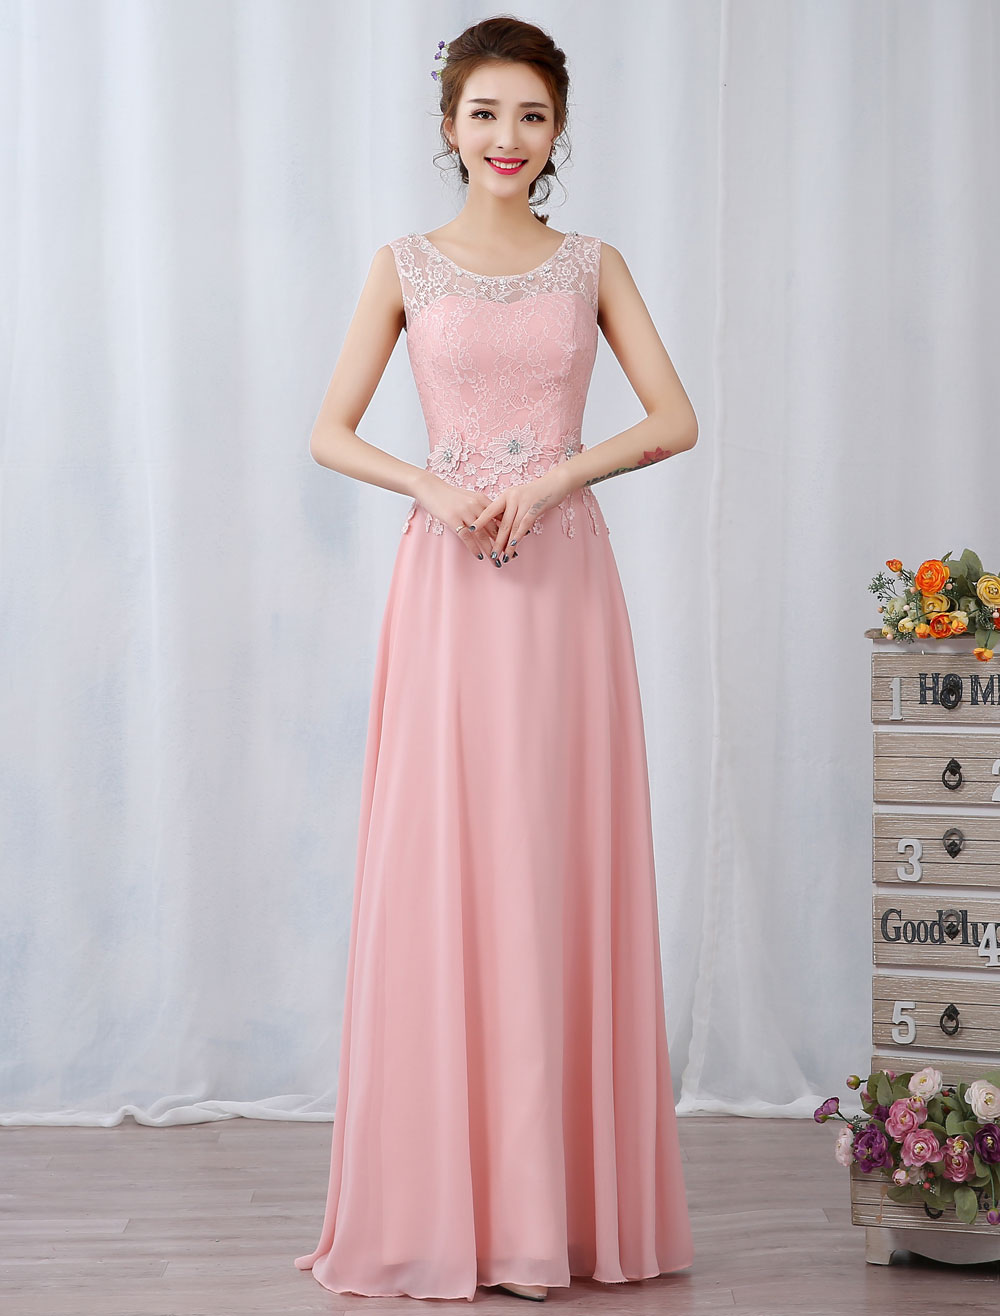 Long Prom Dresses Soft Pink Party Dresses Chiffon Keyhole Lace Applique Beaded Floor Length Formal Dress (Wedding Cheap Party Dress) photo